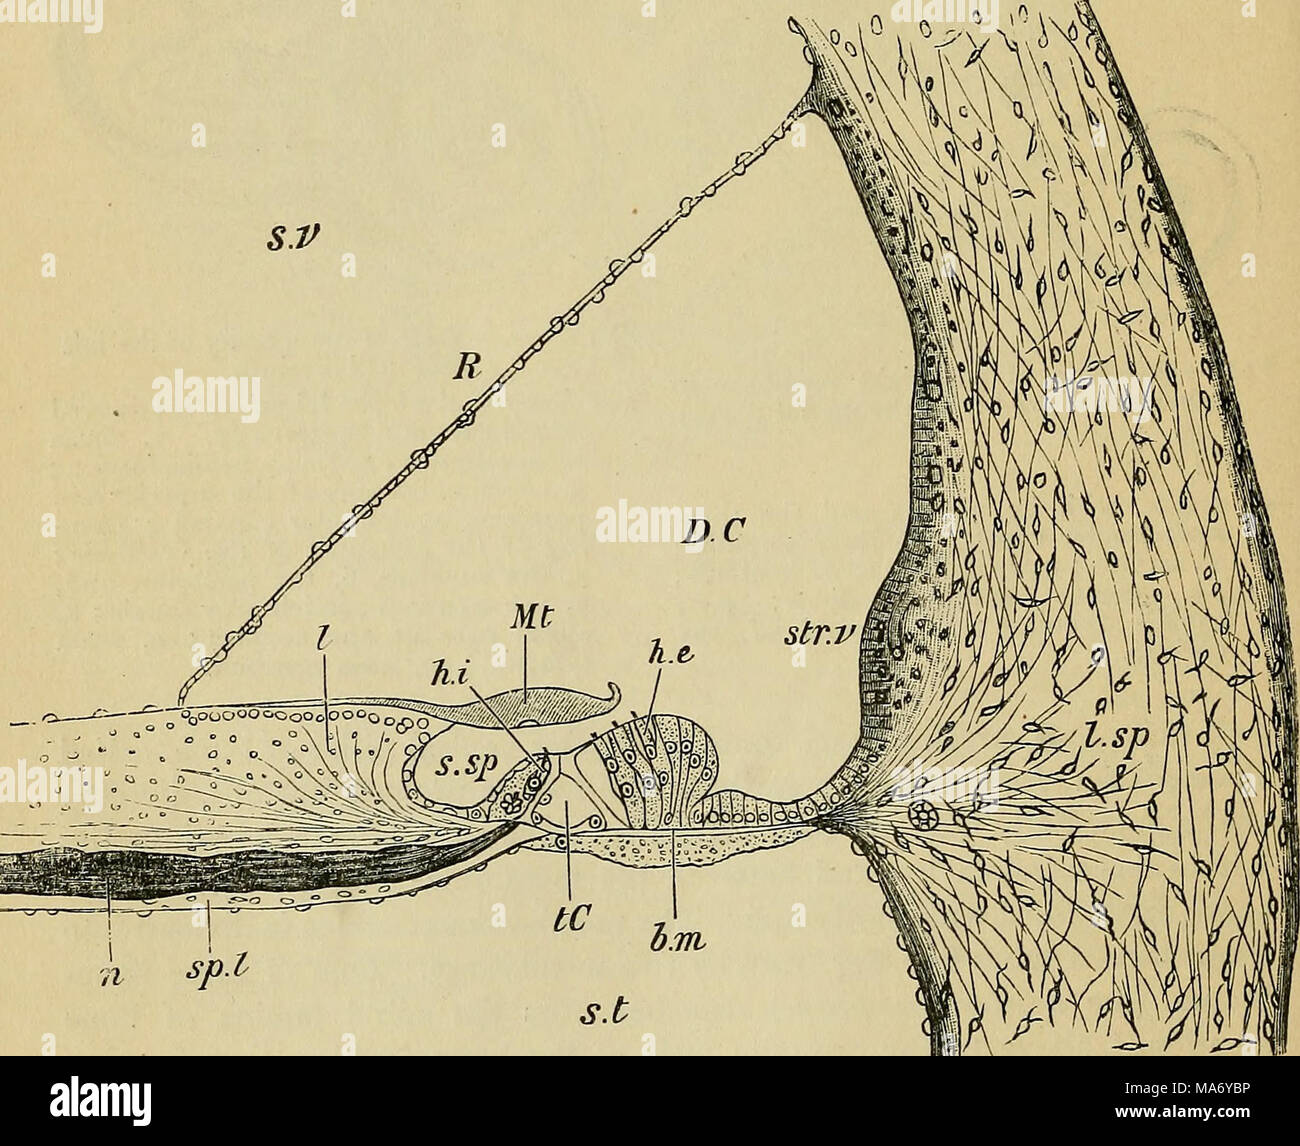 Elementary physiology . Fig. 121.—Vertical section of the first turn of the  human cochlea. (G. Retzius.) s.v. scala vestibuli; s.t., scala tympani;  D.C, canal of the cochlea; sp.l, spiral 'lamina ;